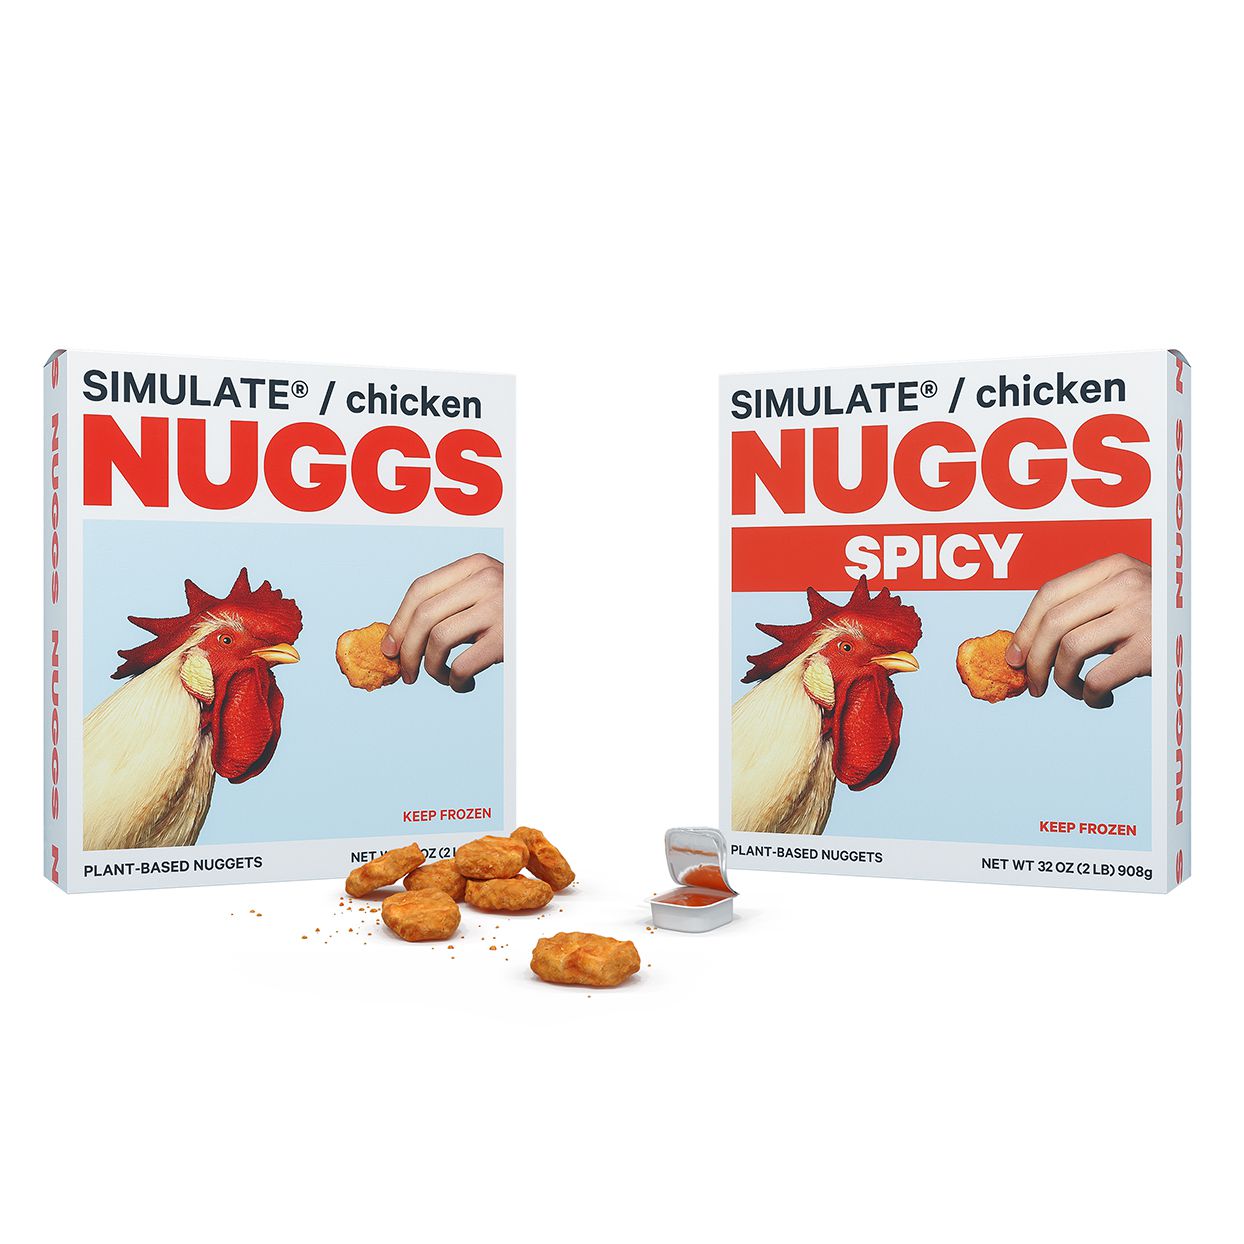 Regular and Spicy NUGGS by Simulate